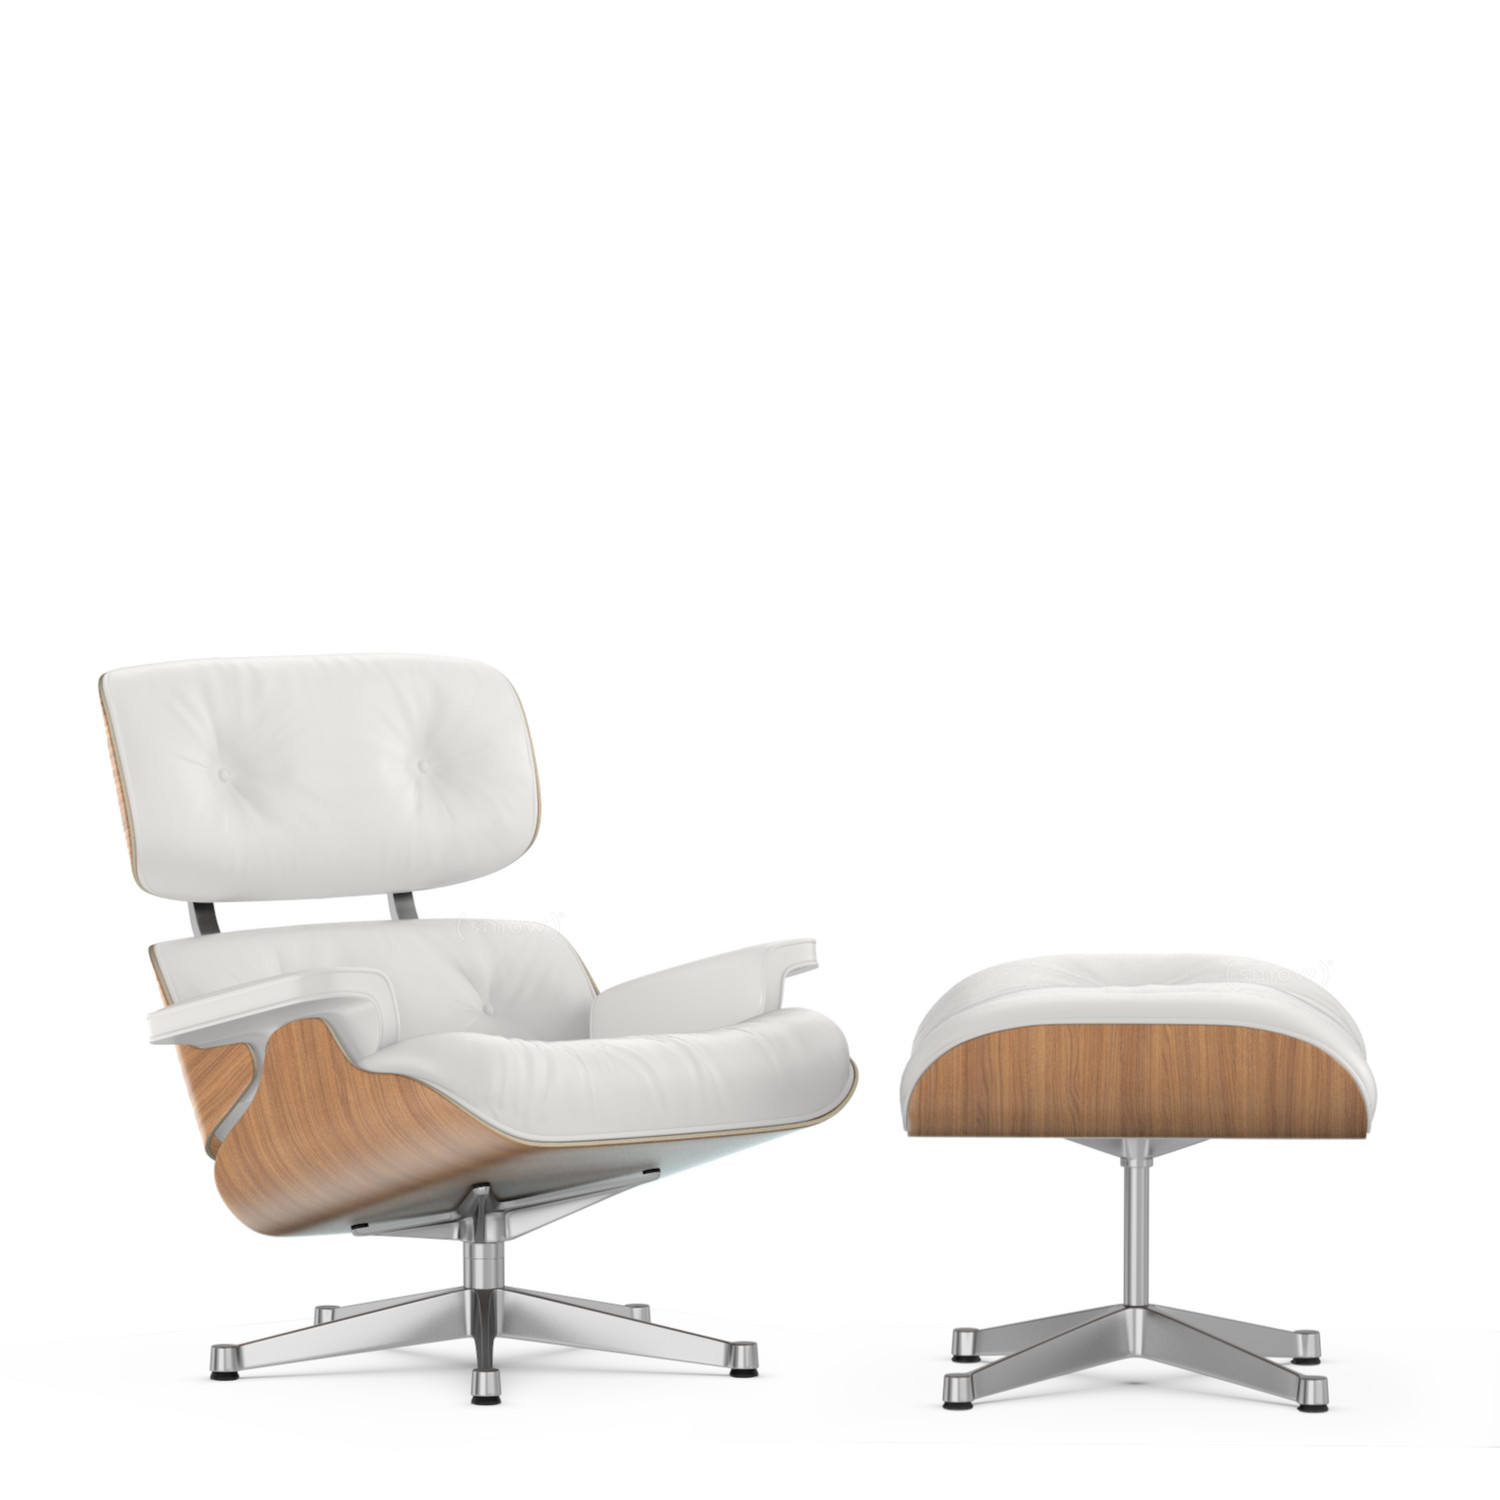 Natte sneeuw geboorte opener Vitra Lounge Chair & Ottoman, Walnut with white pigmentation, Leather  Premium F snow, 89 cm, Aluminium polished by Charles & Ray Eames, 1956 -  Designer furniture by smow.com